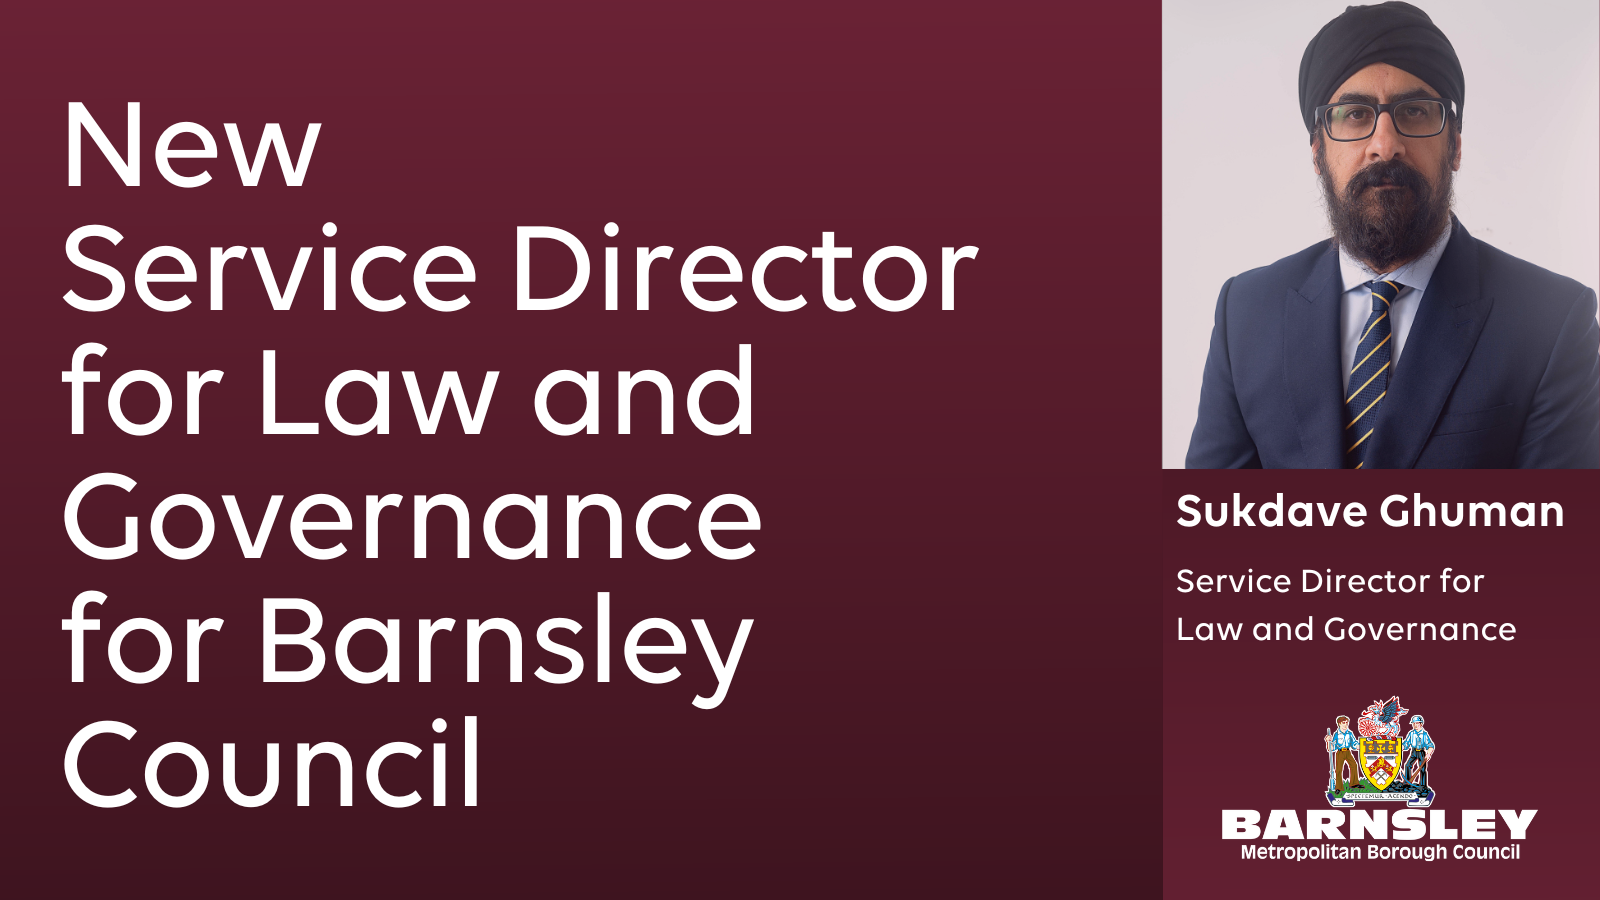 New service director for Law and Governance for Barnsley Council